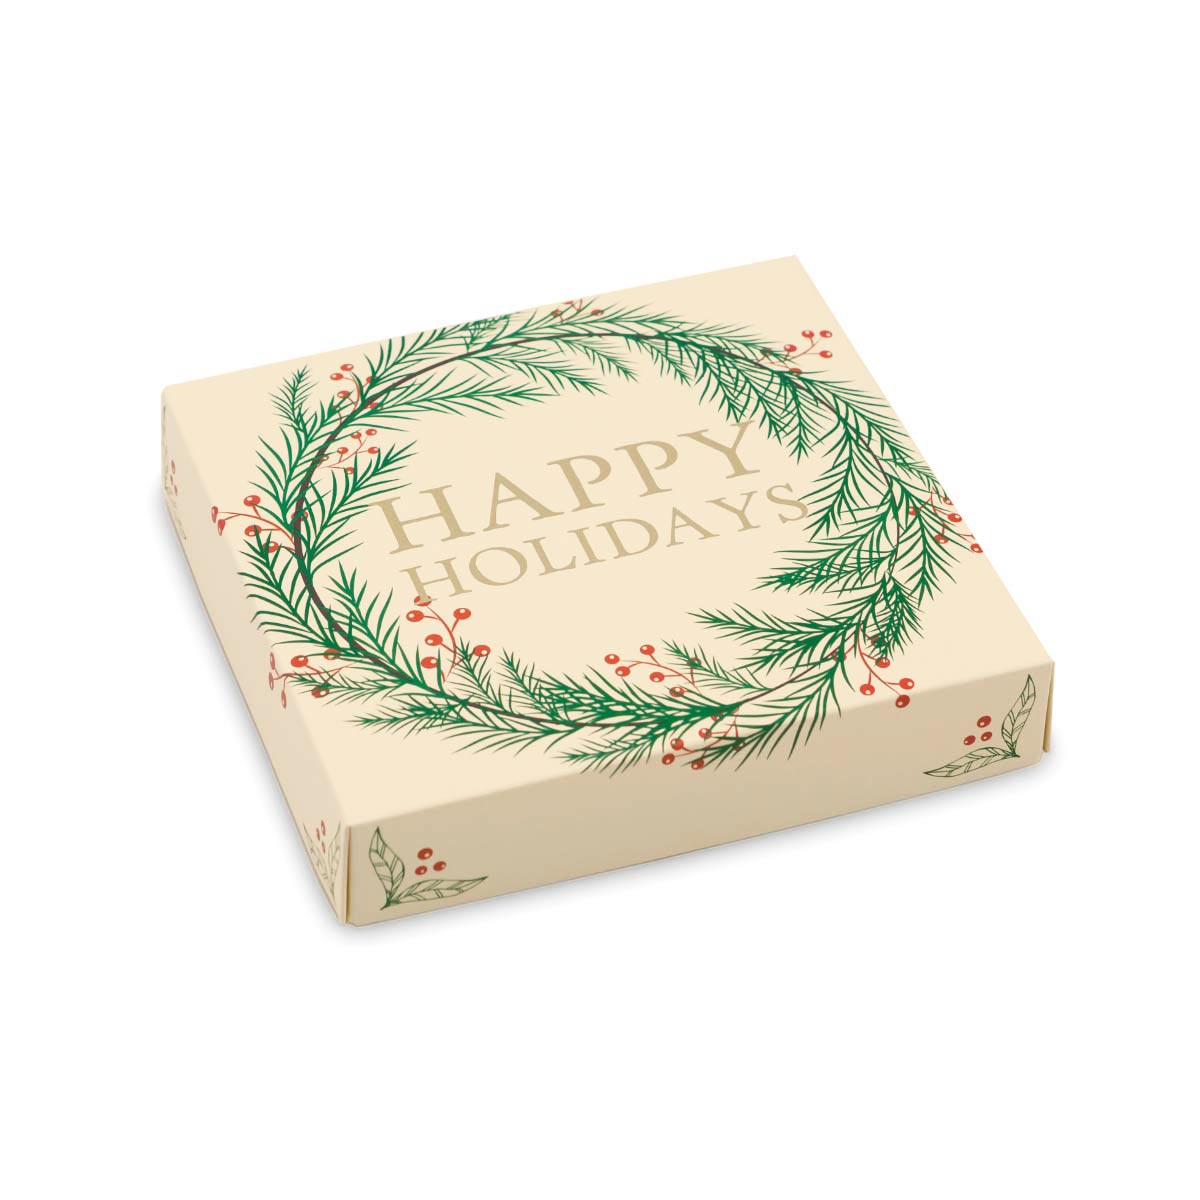 Happy Holidays Wreath Themed Box Cover for 16 Piece Holiday Assortment